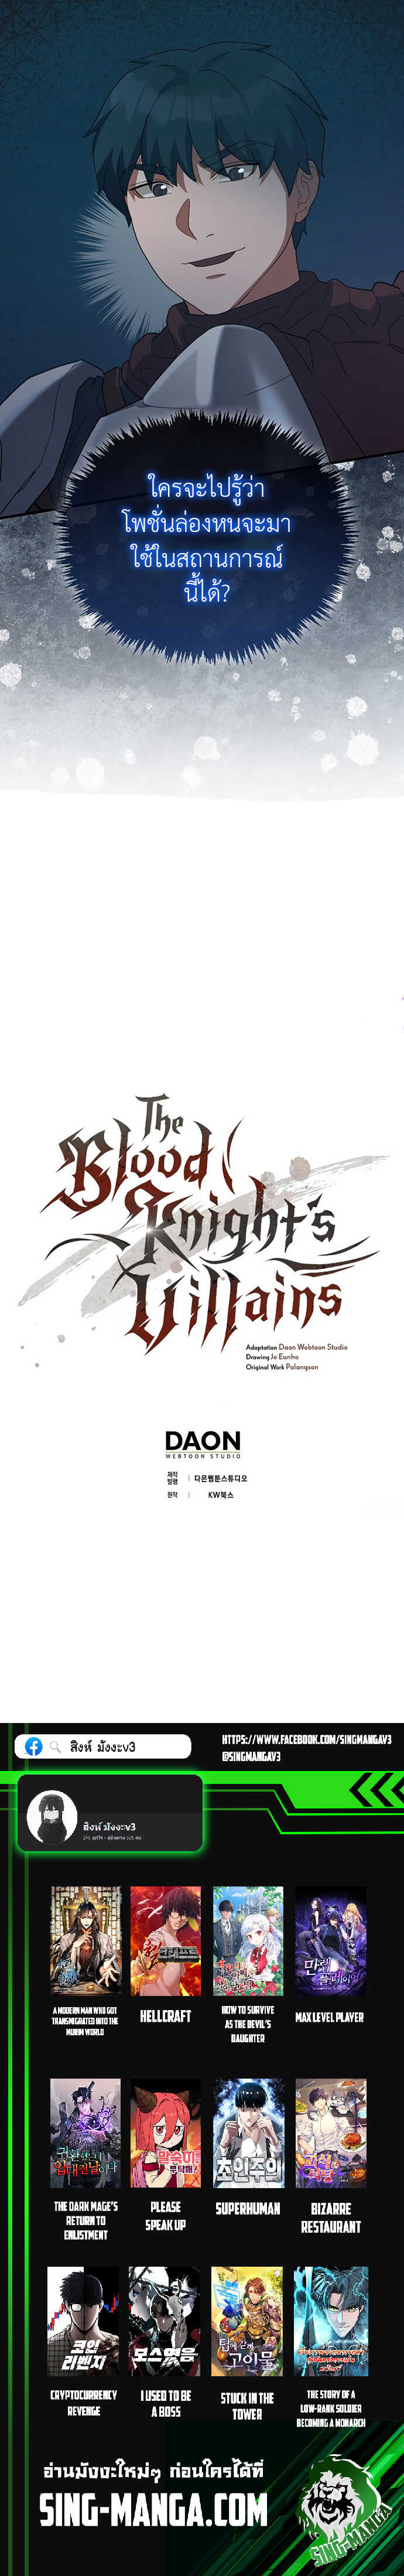 The Blood Knight’s Villains 22 09